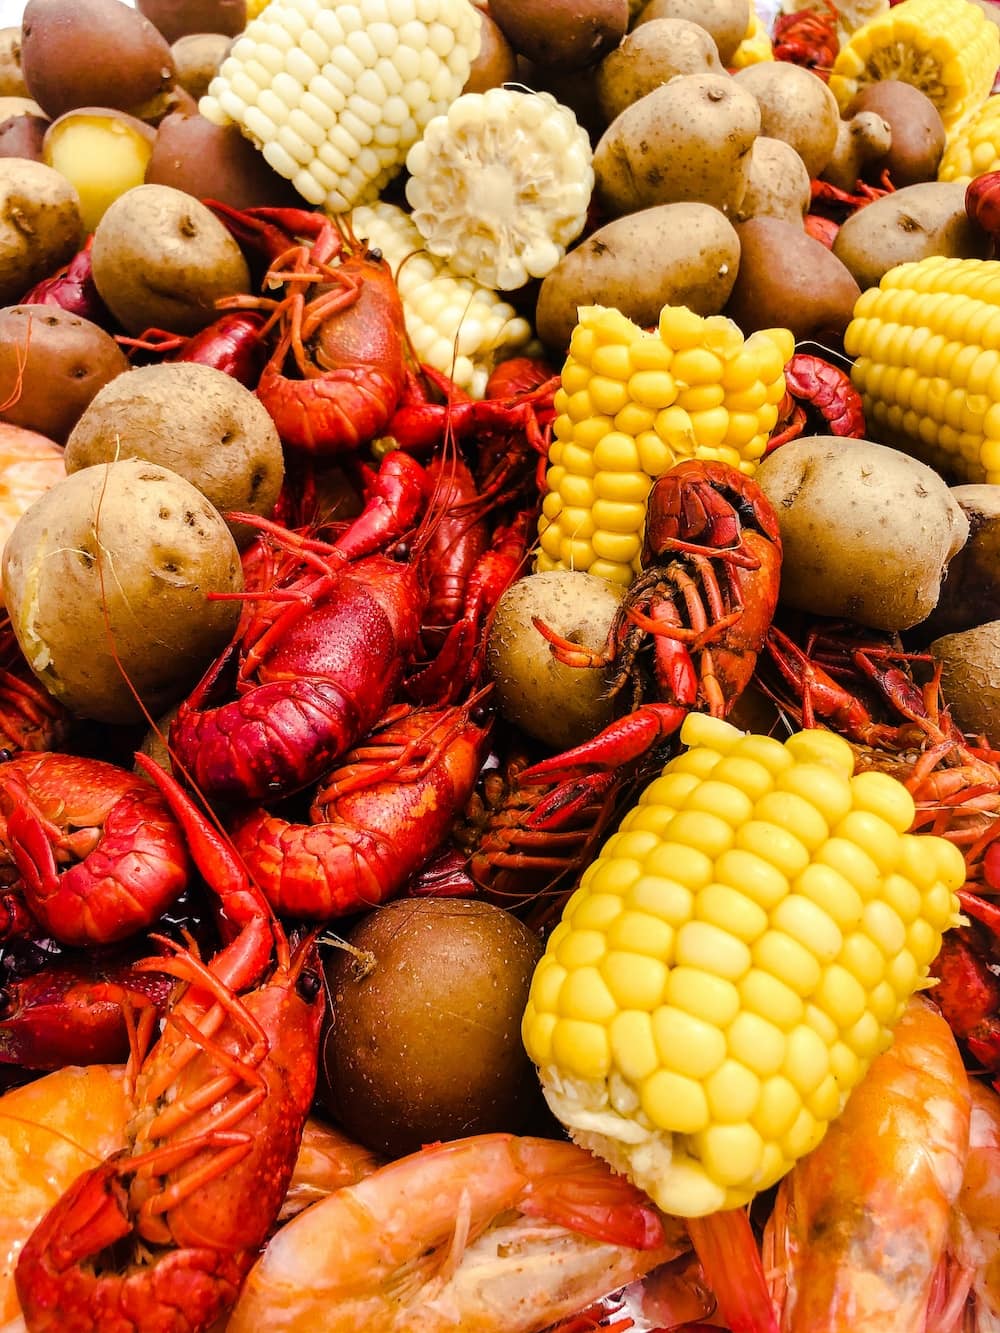 Very close up of crawfish, corn, and potatoes after crawfish boil